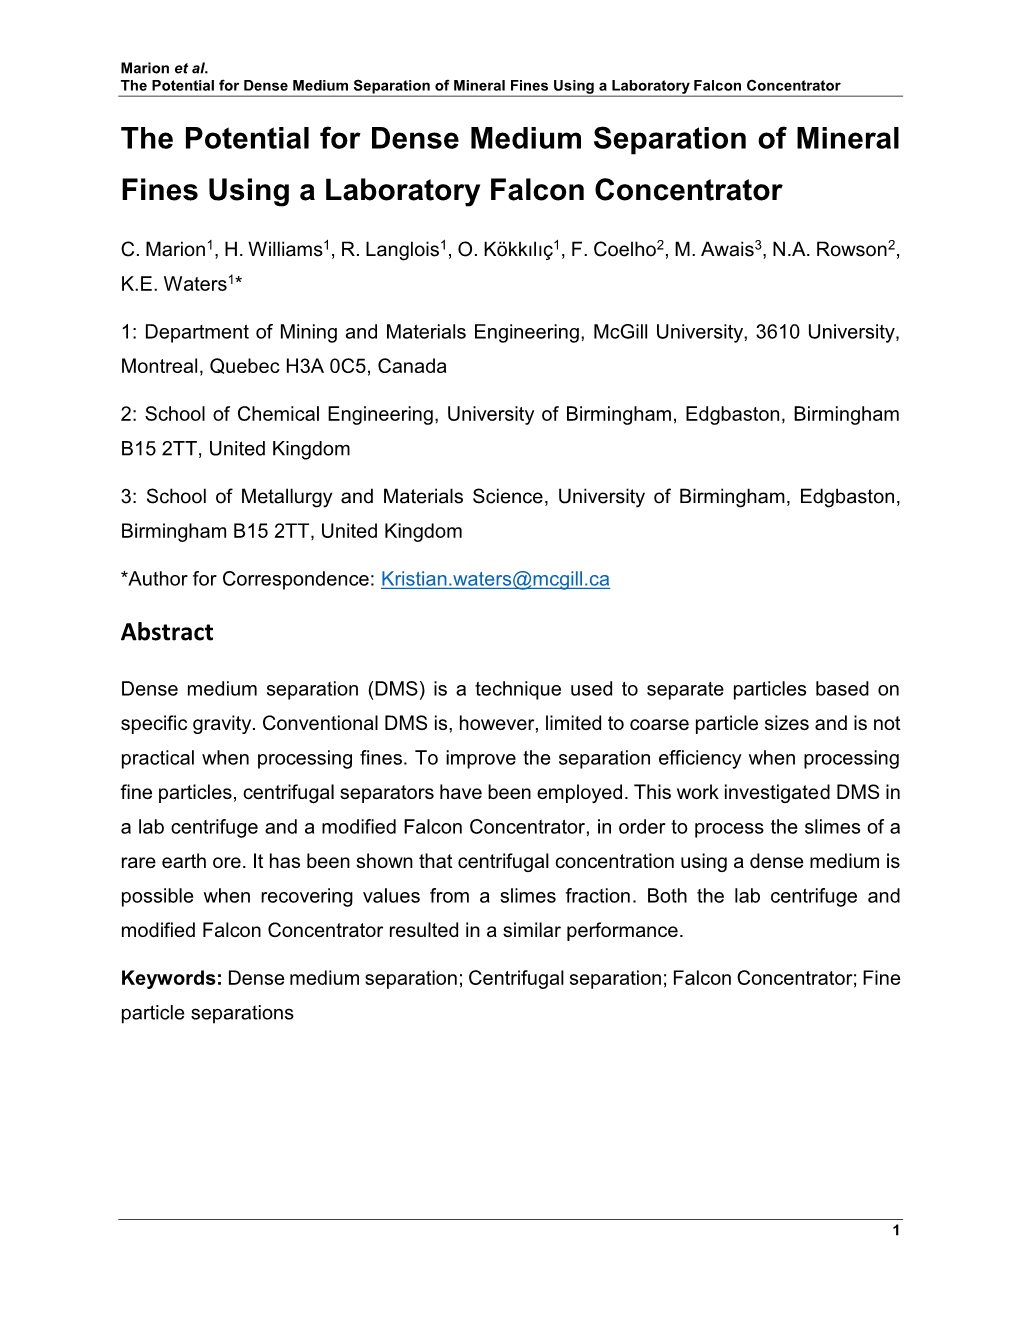 The Potential for Dense Medium Separation of Mineral Fines Using a Laboratory Falcon Concentrator